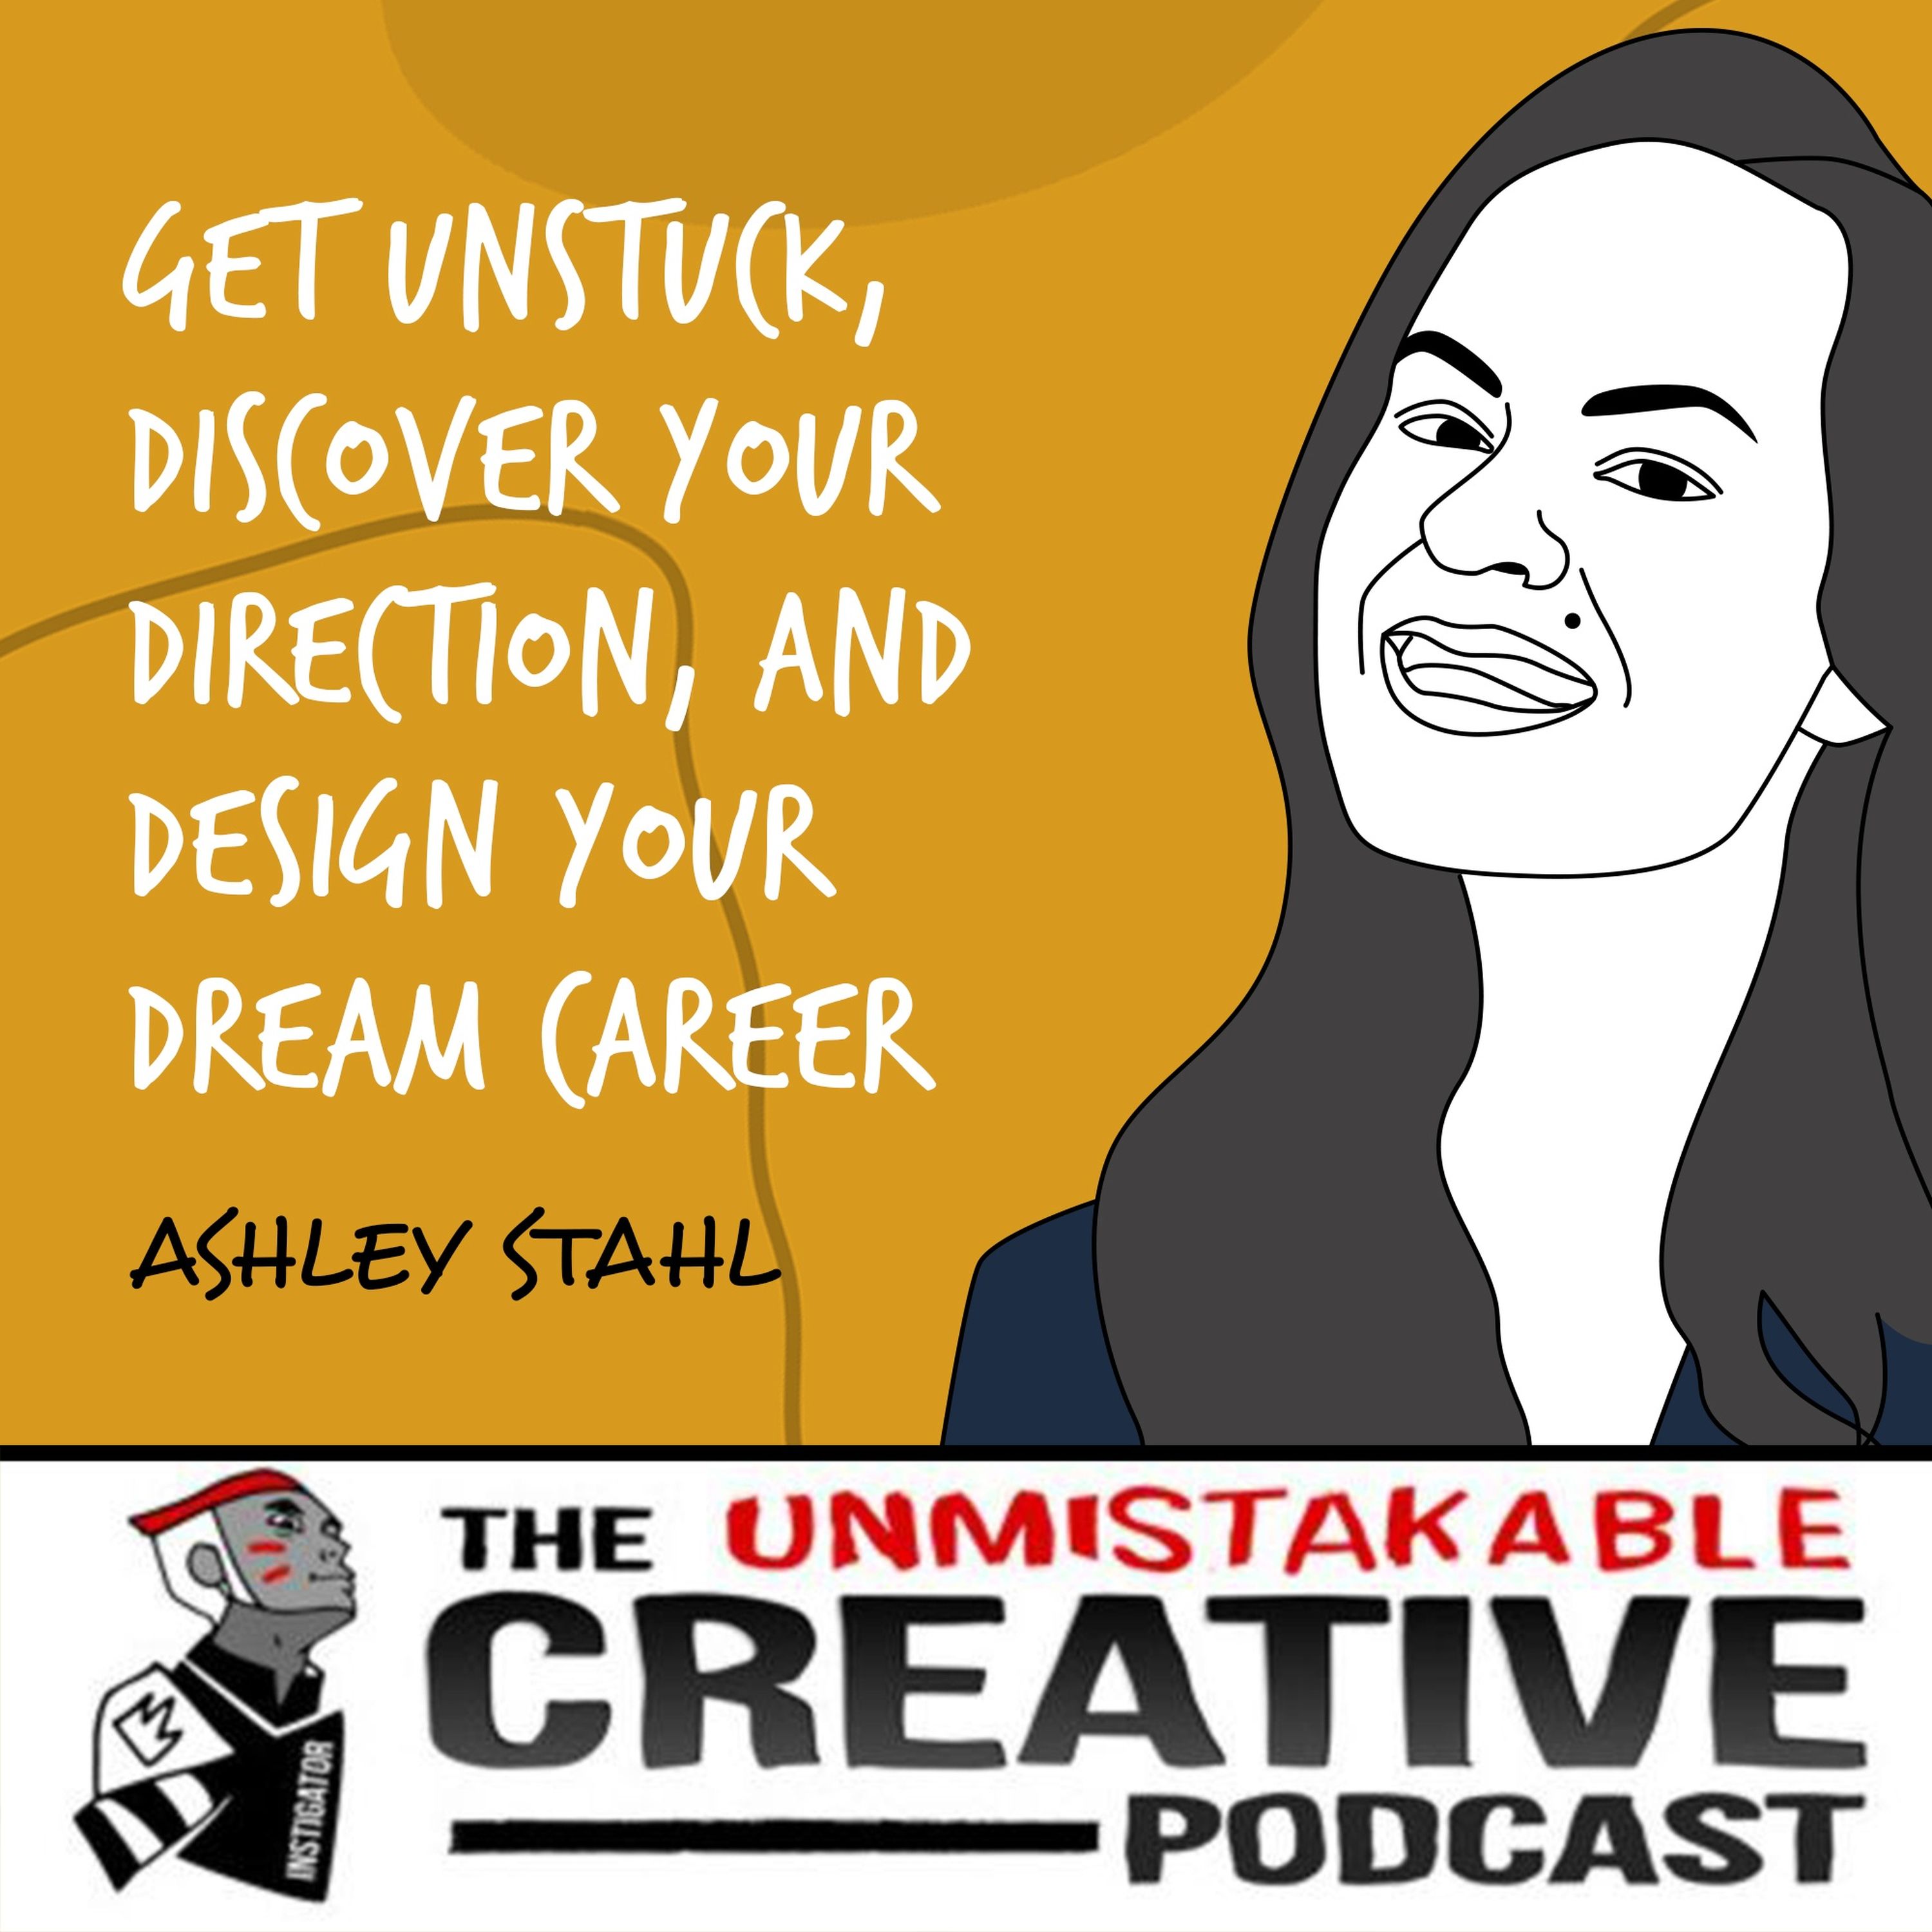 Ashley Stahl - Part 2 | Get Unstuck, Discover Your Direction, and Design Your Dream Career Image